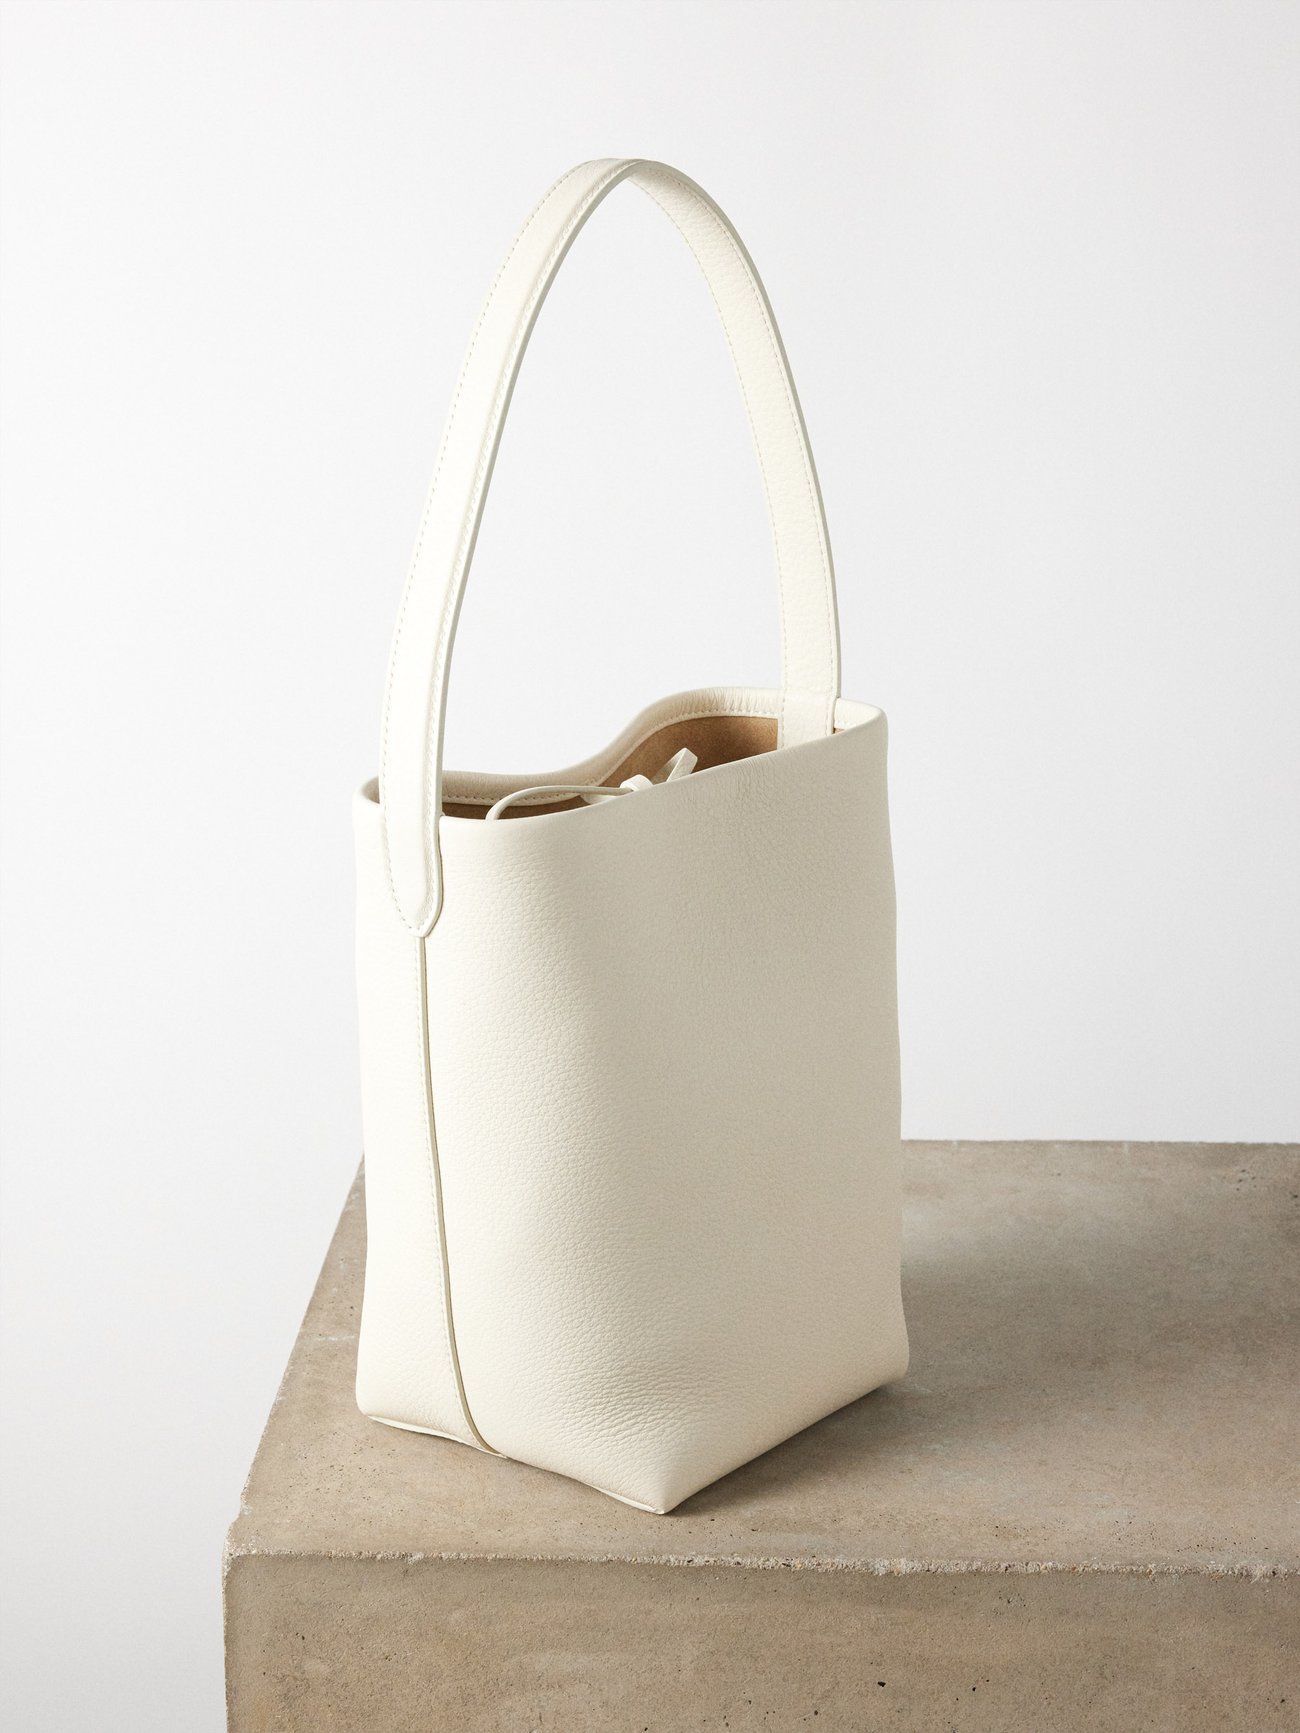 The Row Park Small Leather Tote Bag in White